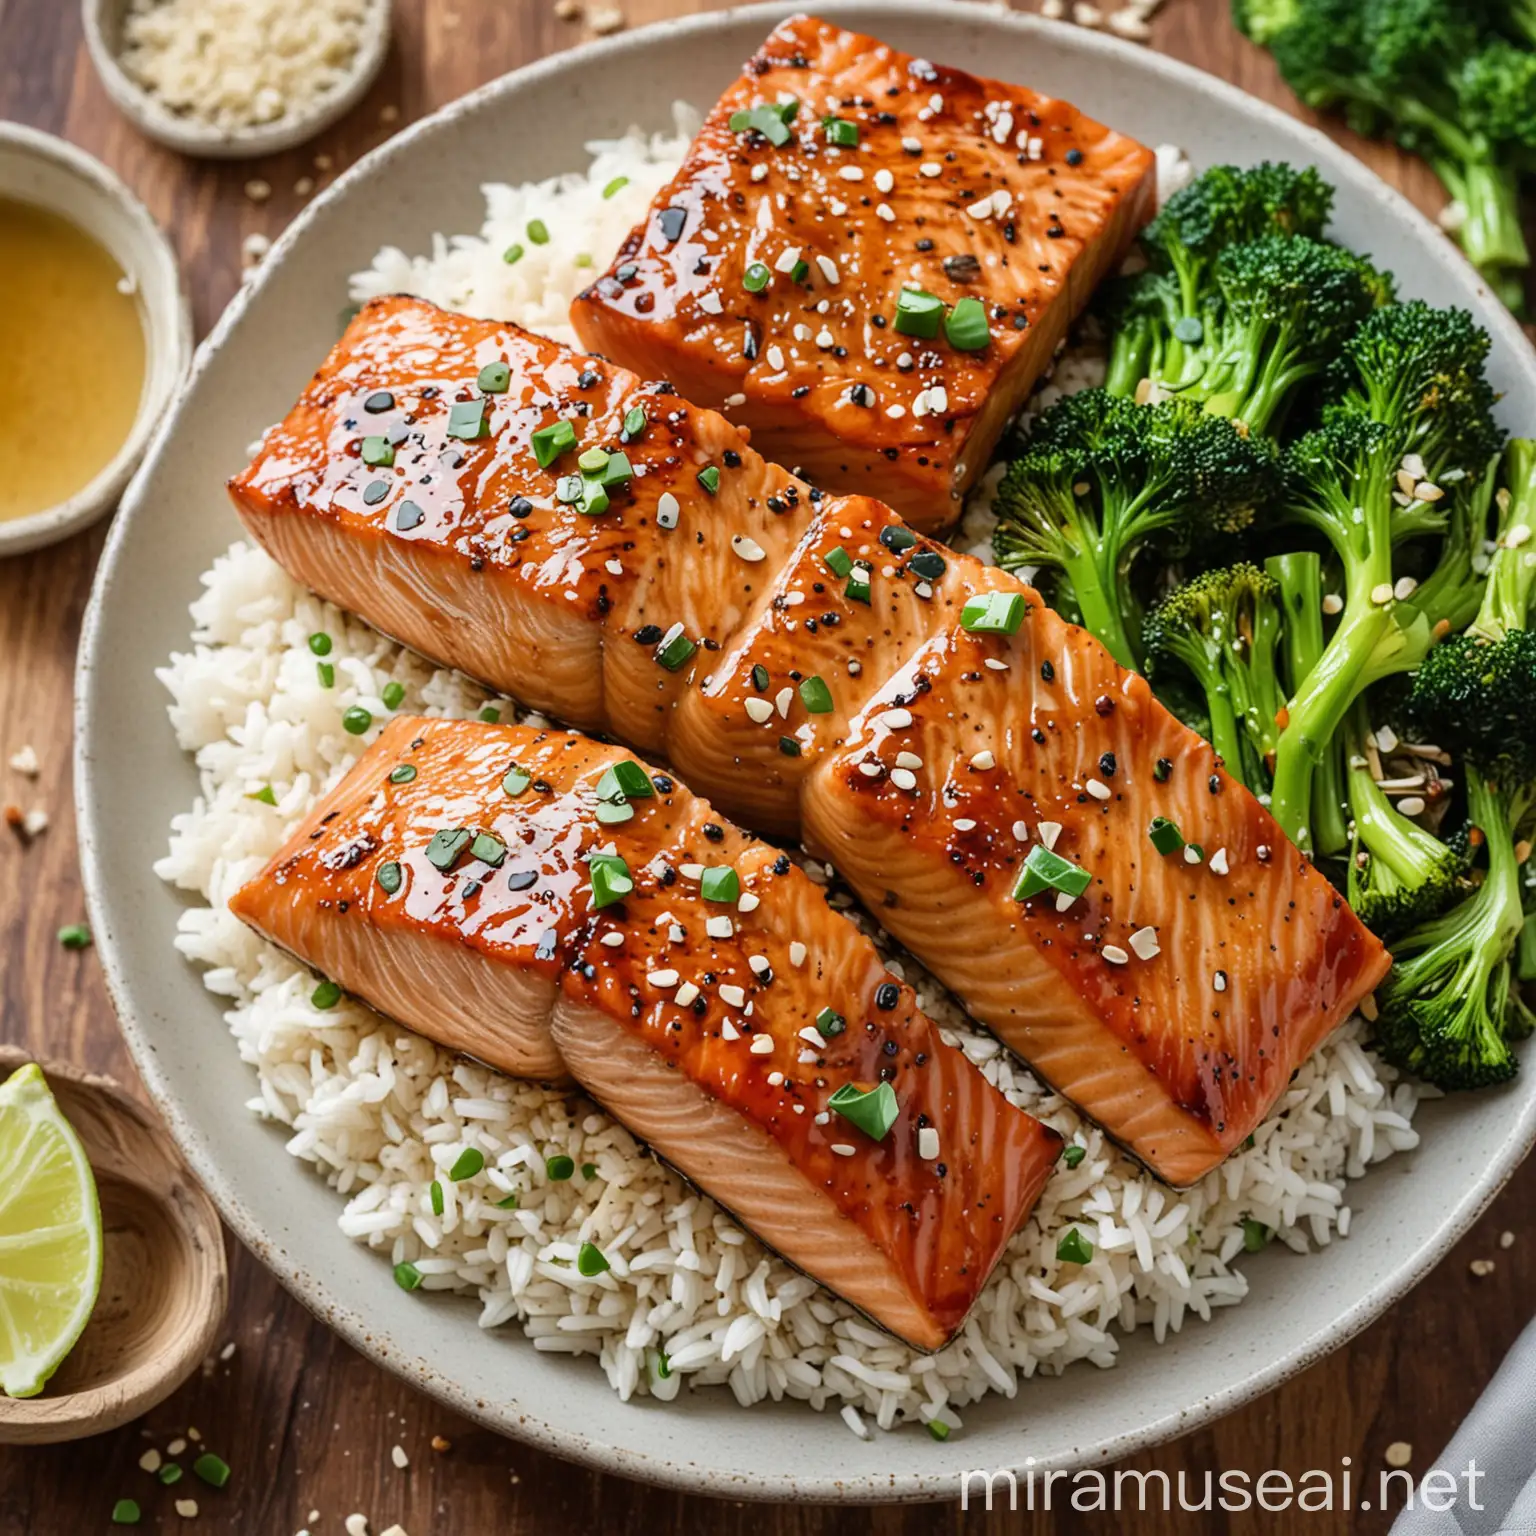 A mouth-watering picture of honey garlic salmon, garnished with sesame seeds and green onions, served with a side of steamed broccoli and rice.